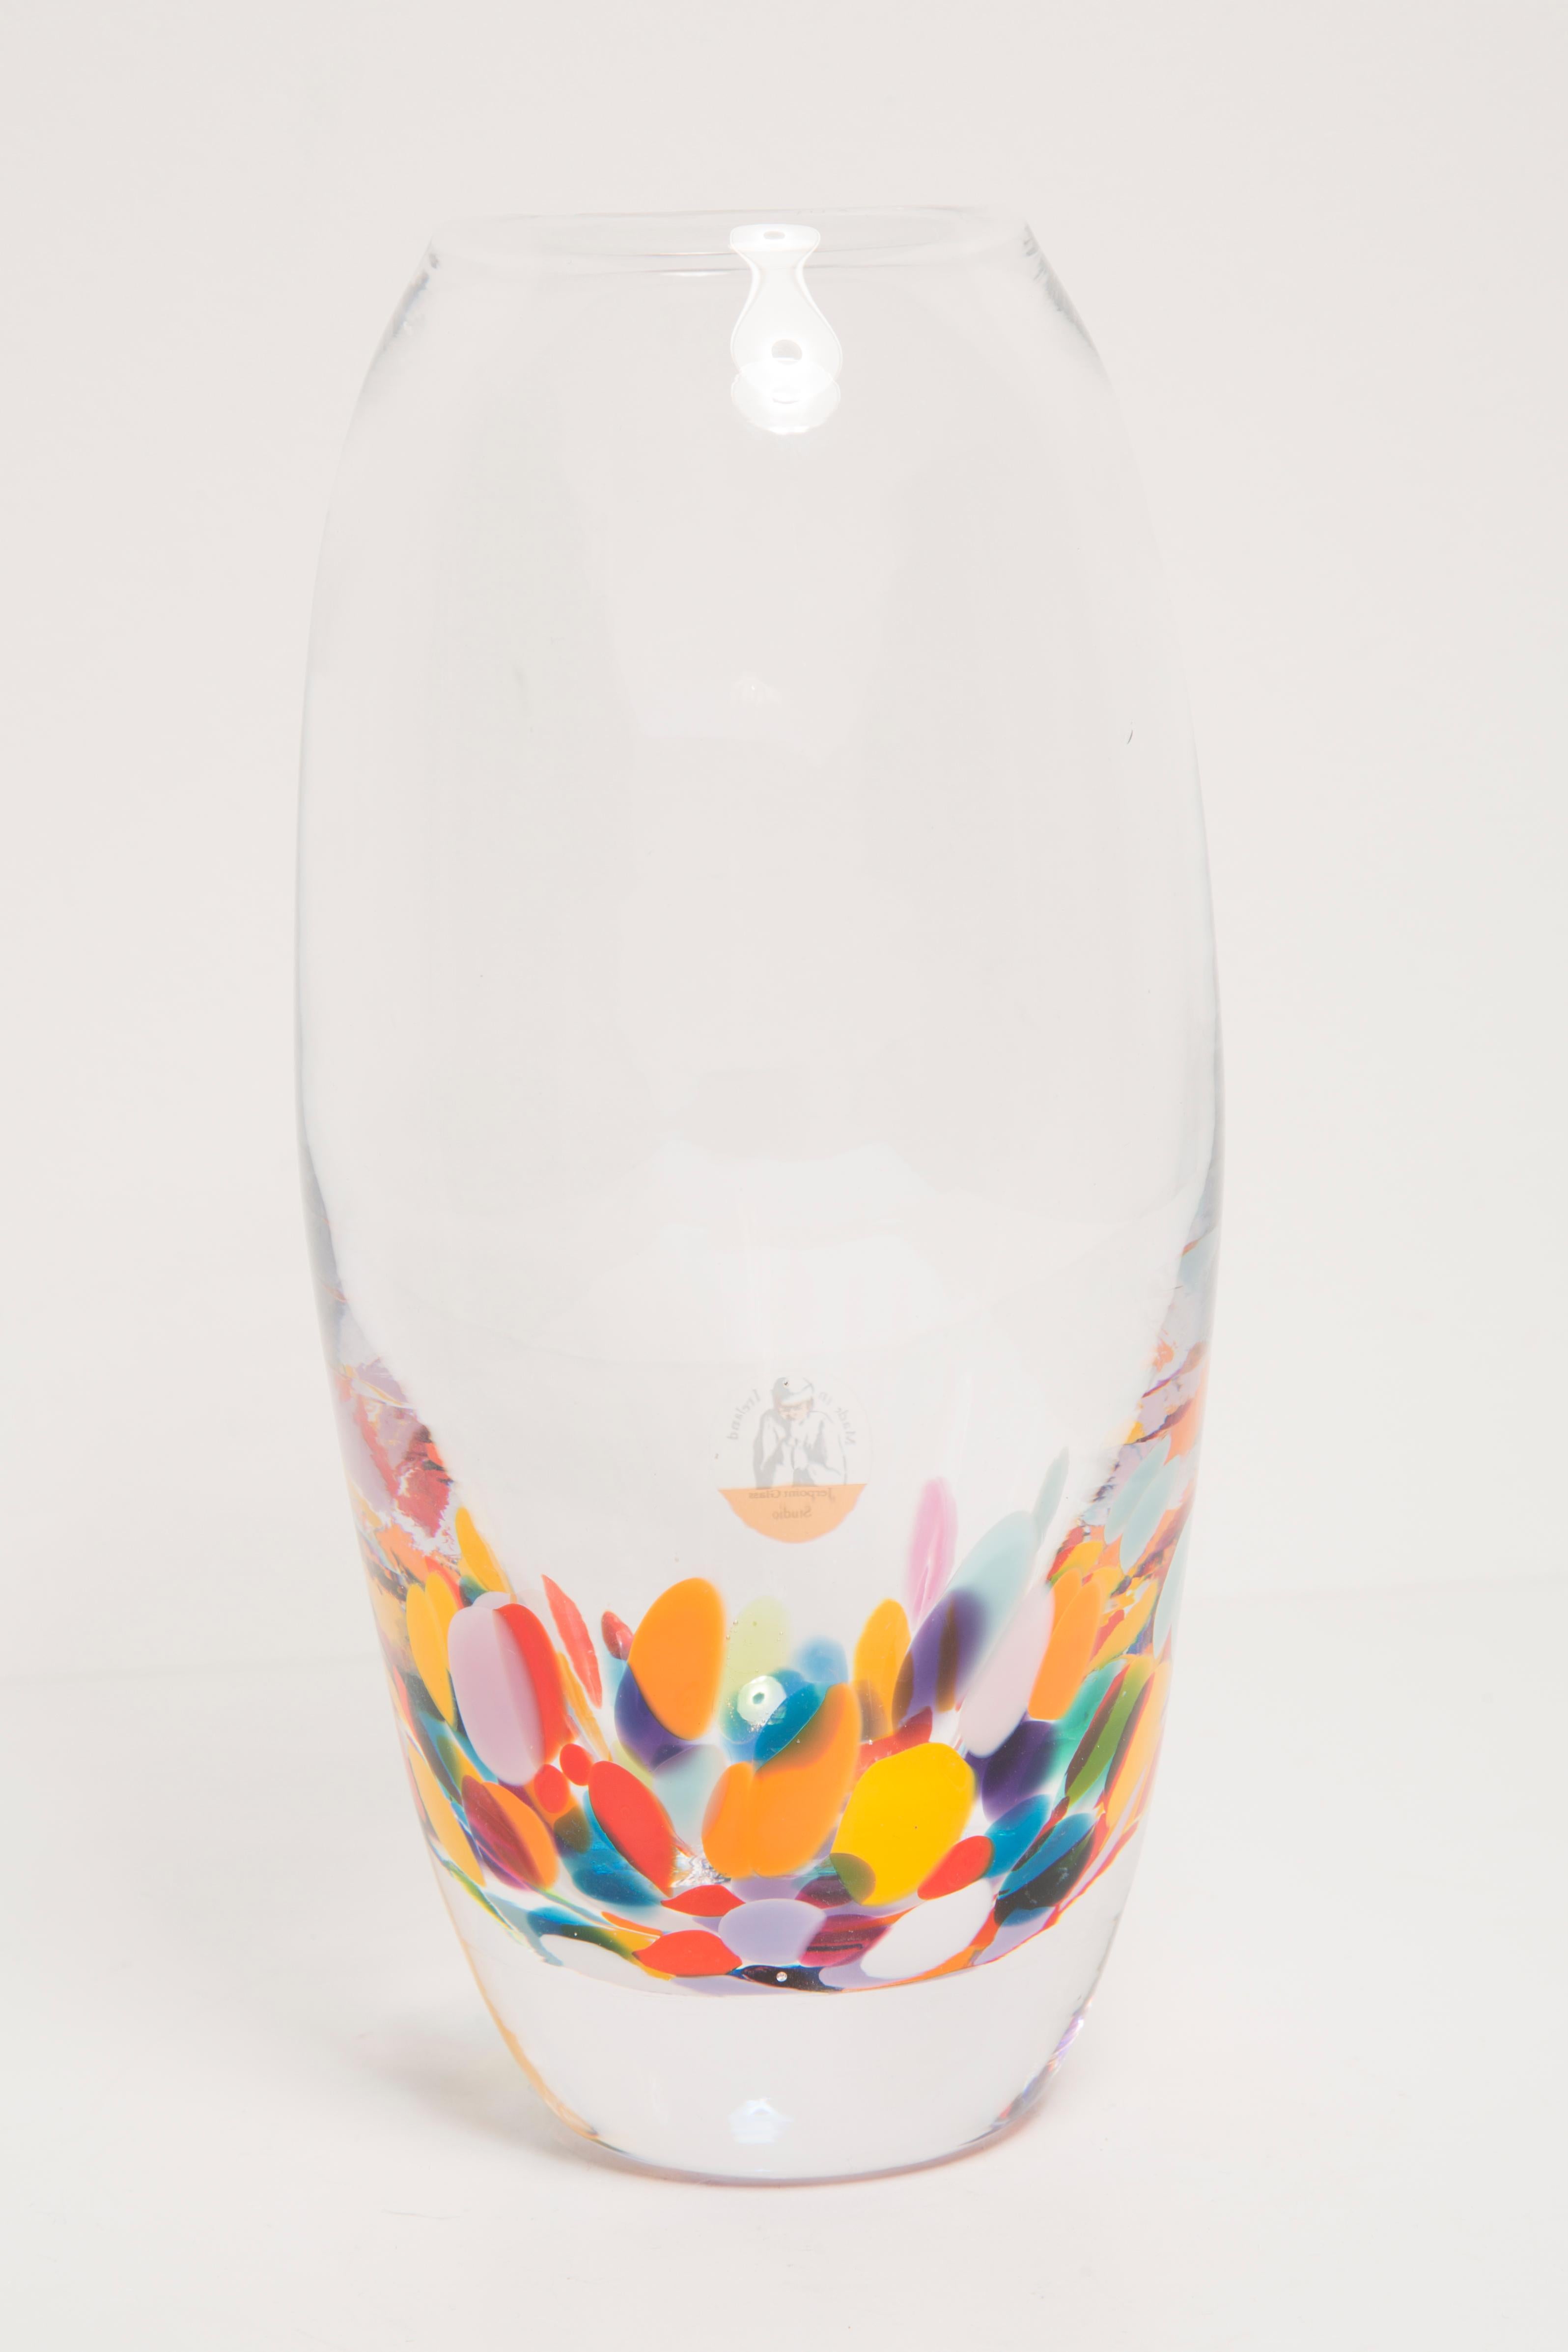 Beautiful vase made from Murano glass in perfect condition. The vase looks like it has just been taken out of the box. No jags, defects etc. Only one unique piece. 

The small tulip vase is stunning in its simplicity and both a beautiful and